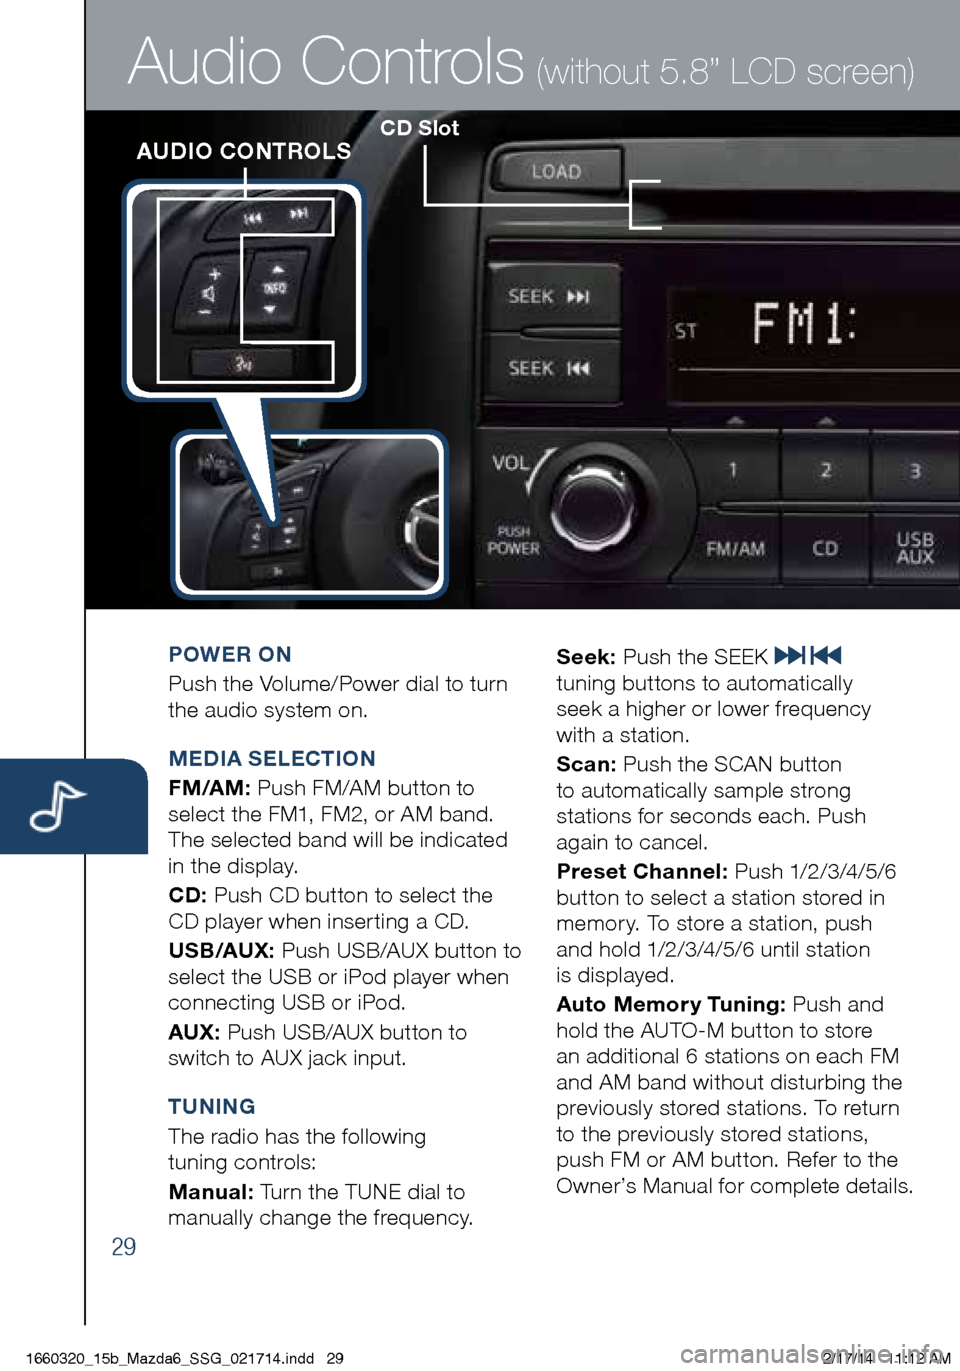 MAZDA MODEL 6 2015  Smart Start Guide (in English) 29
CD SlotAUDIO CONTROLS
Audio Controls (without 5.8” LCD screen)
POWER ON
Push the Volume/Power dial to turn 
the audio system on.
MEDIA SELECTION
FM/AM: Push FM/AM button to 
select the FM1, FM2, 